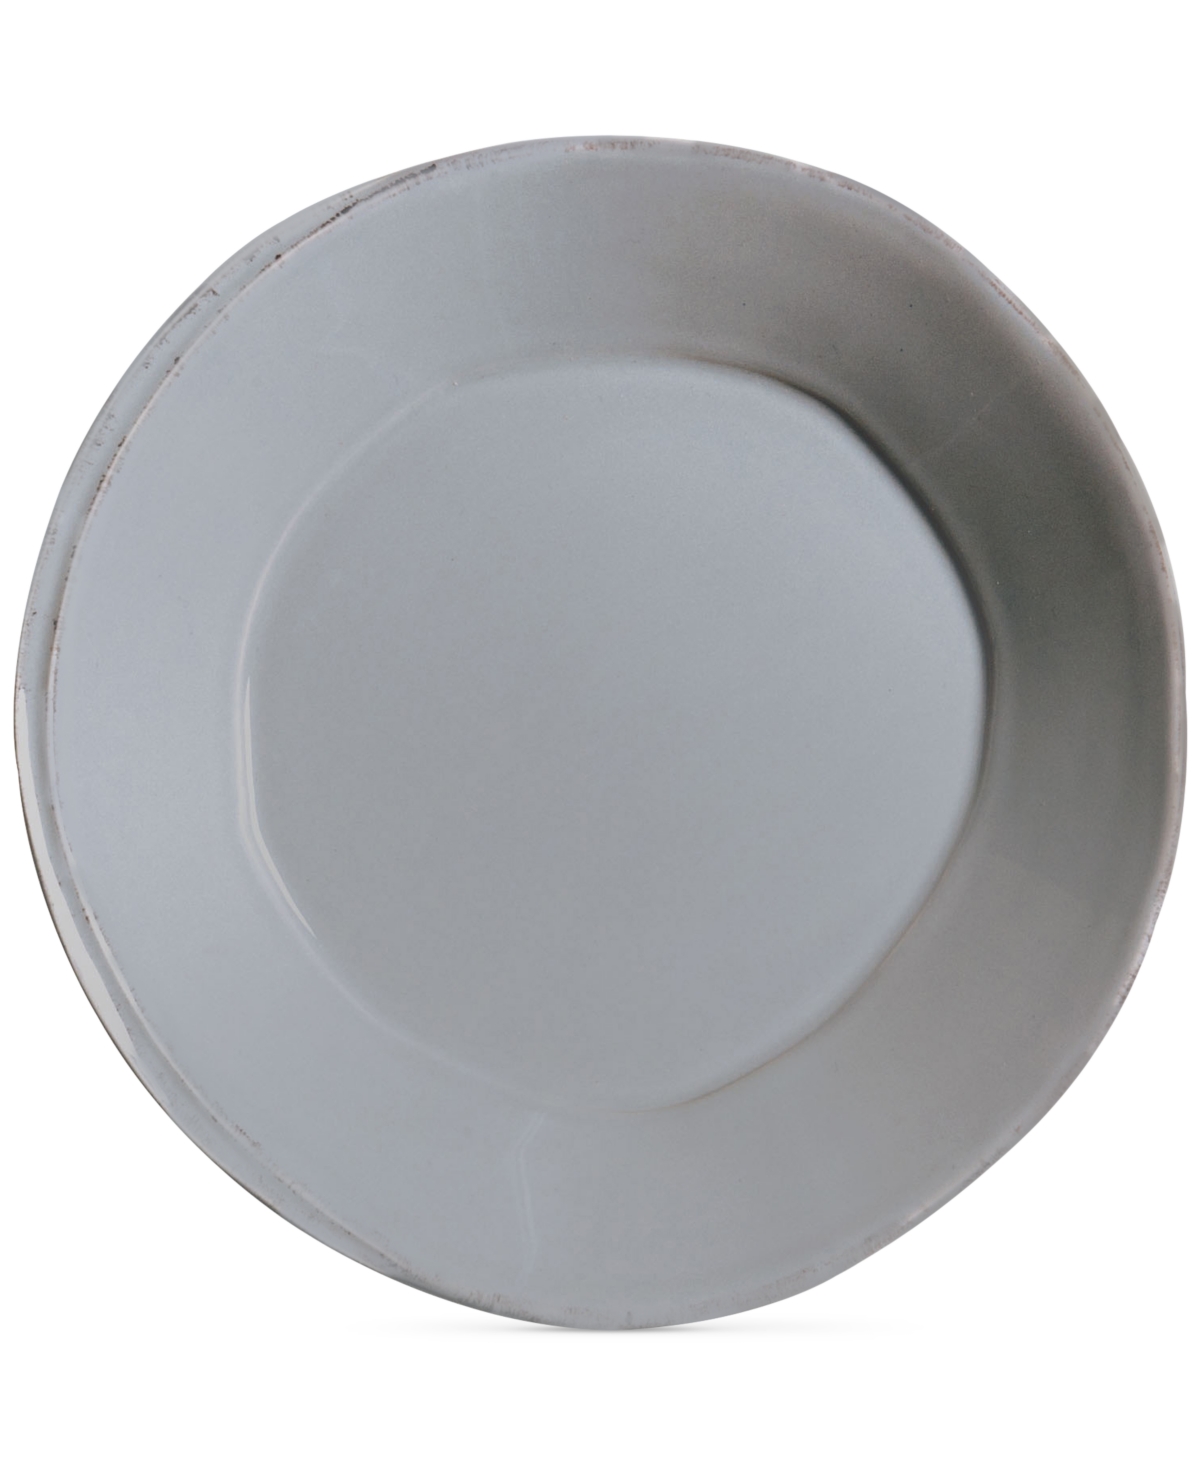 Lastra Collection Pasta Bowl - Linen